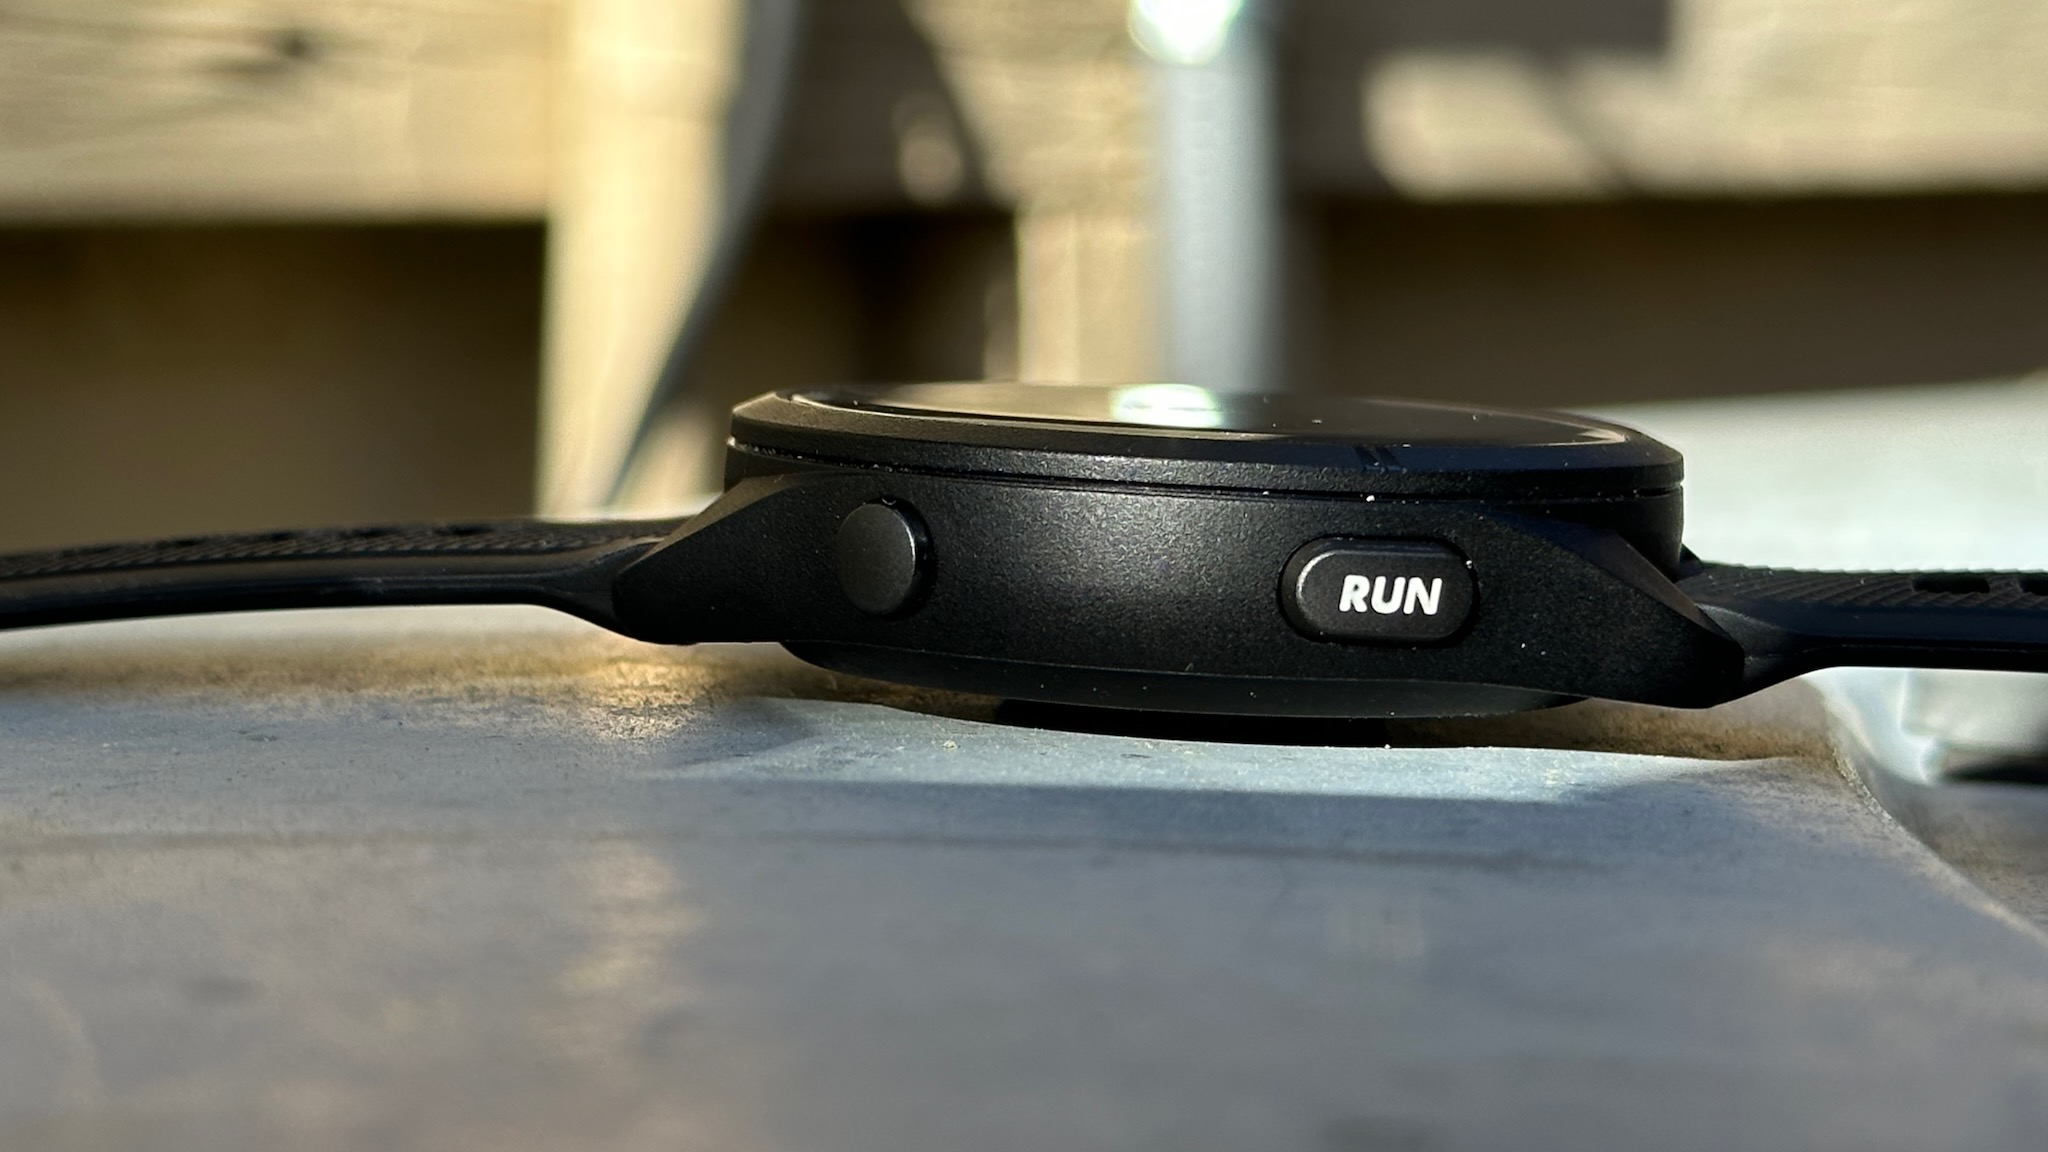 Side view of the Garmin Forerunner 265, showing the new wider 